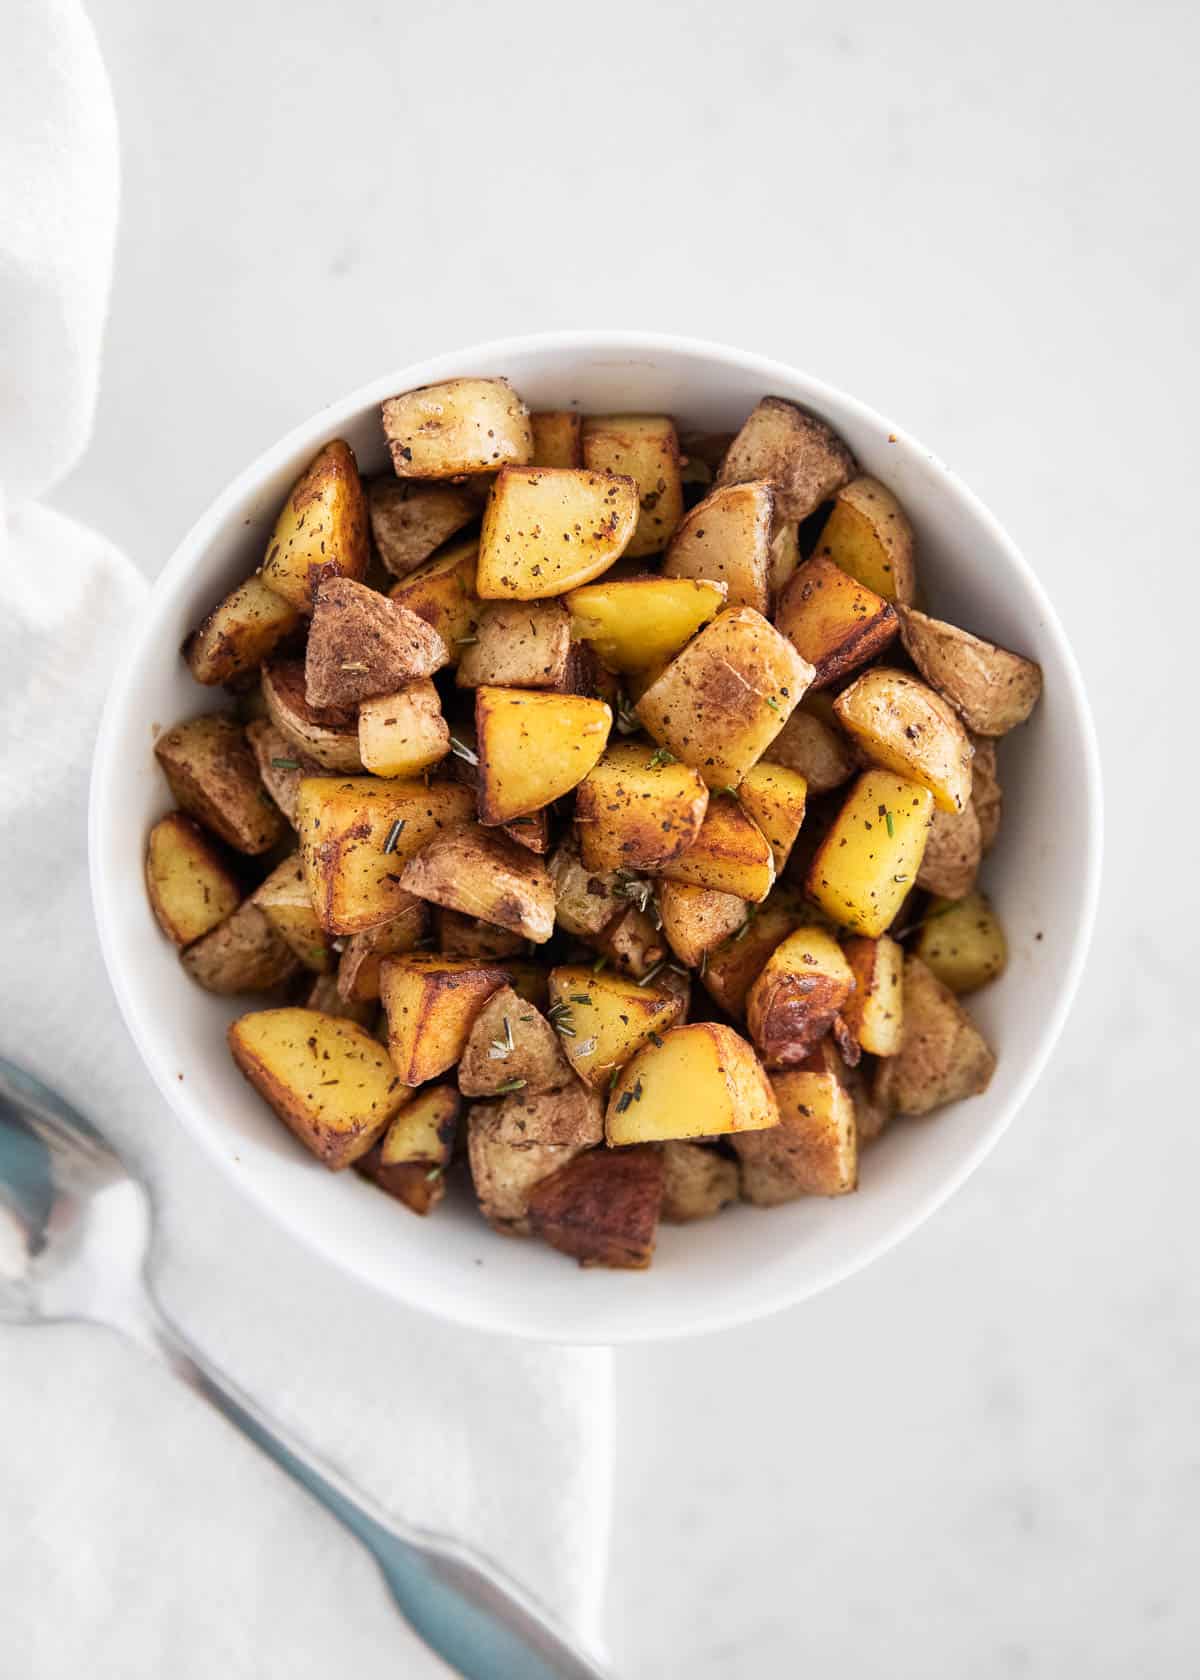 Cast iron skillet potatoes in white bowl.